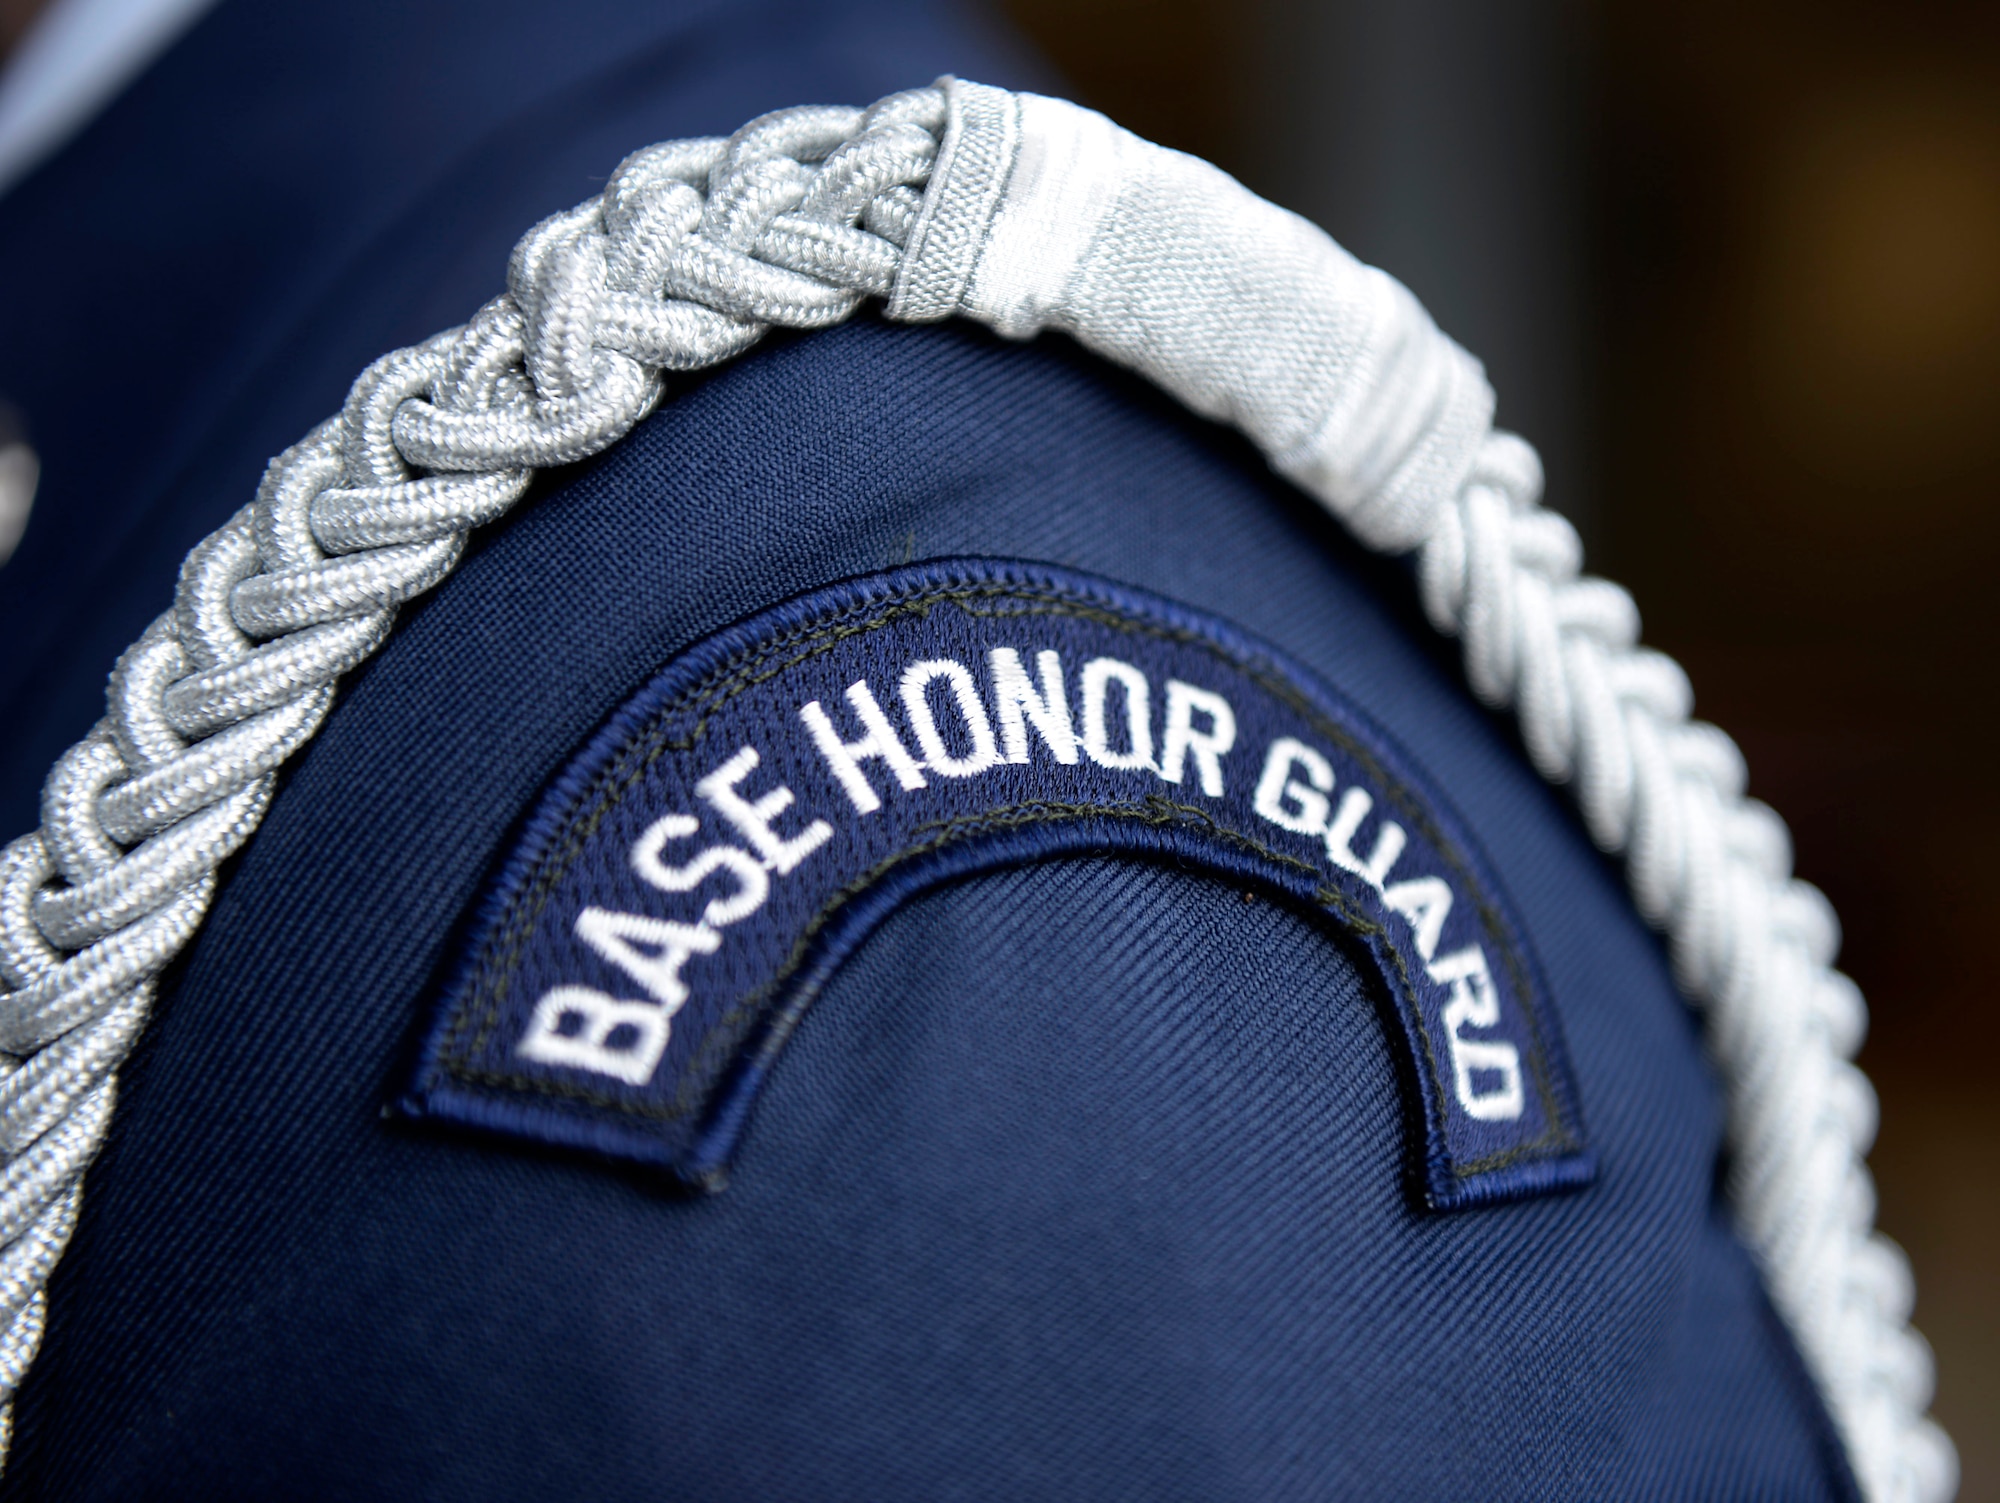 The Pease Base Honor Guard provides military honors to veteran funerals throughout N.H., Southern Maine and Northern Mass. (N.H. Air National Guard photo by Staff Sgt. Kayla White)